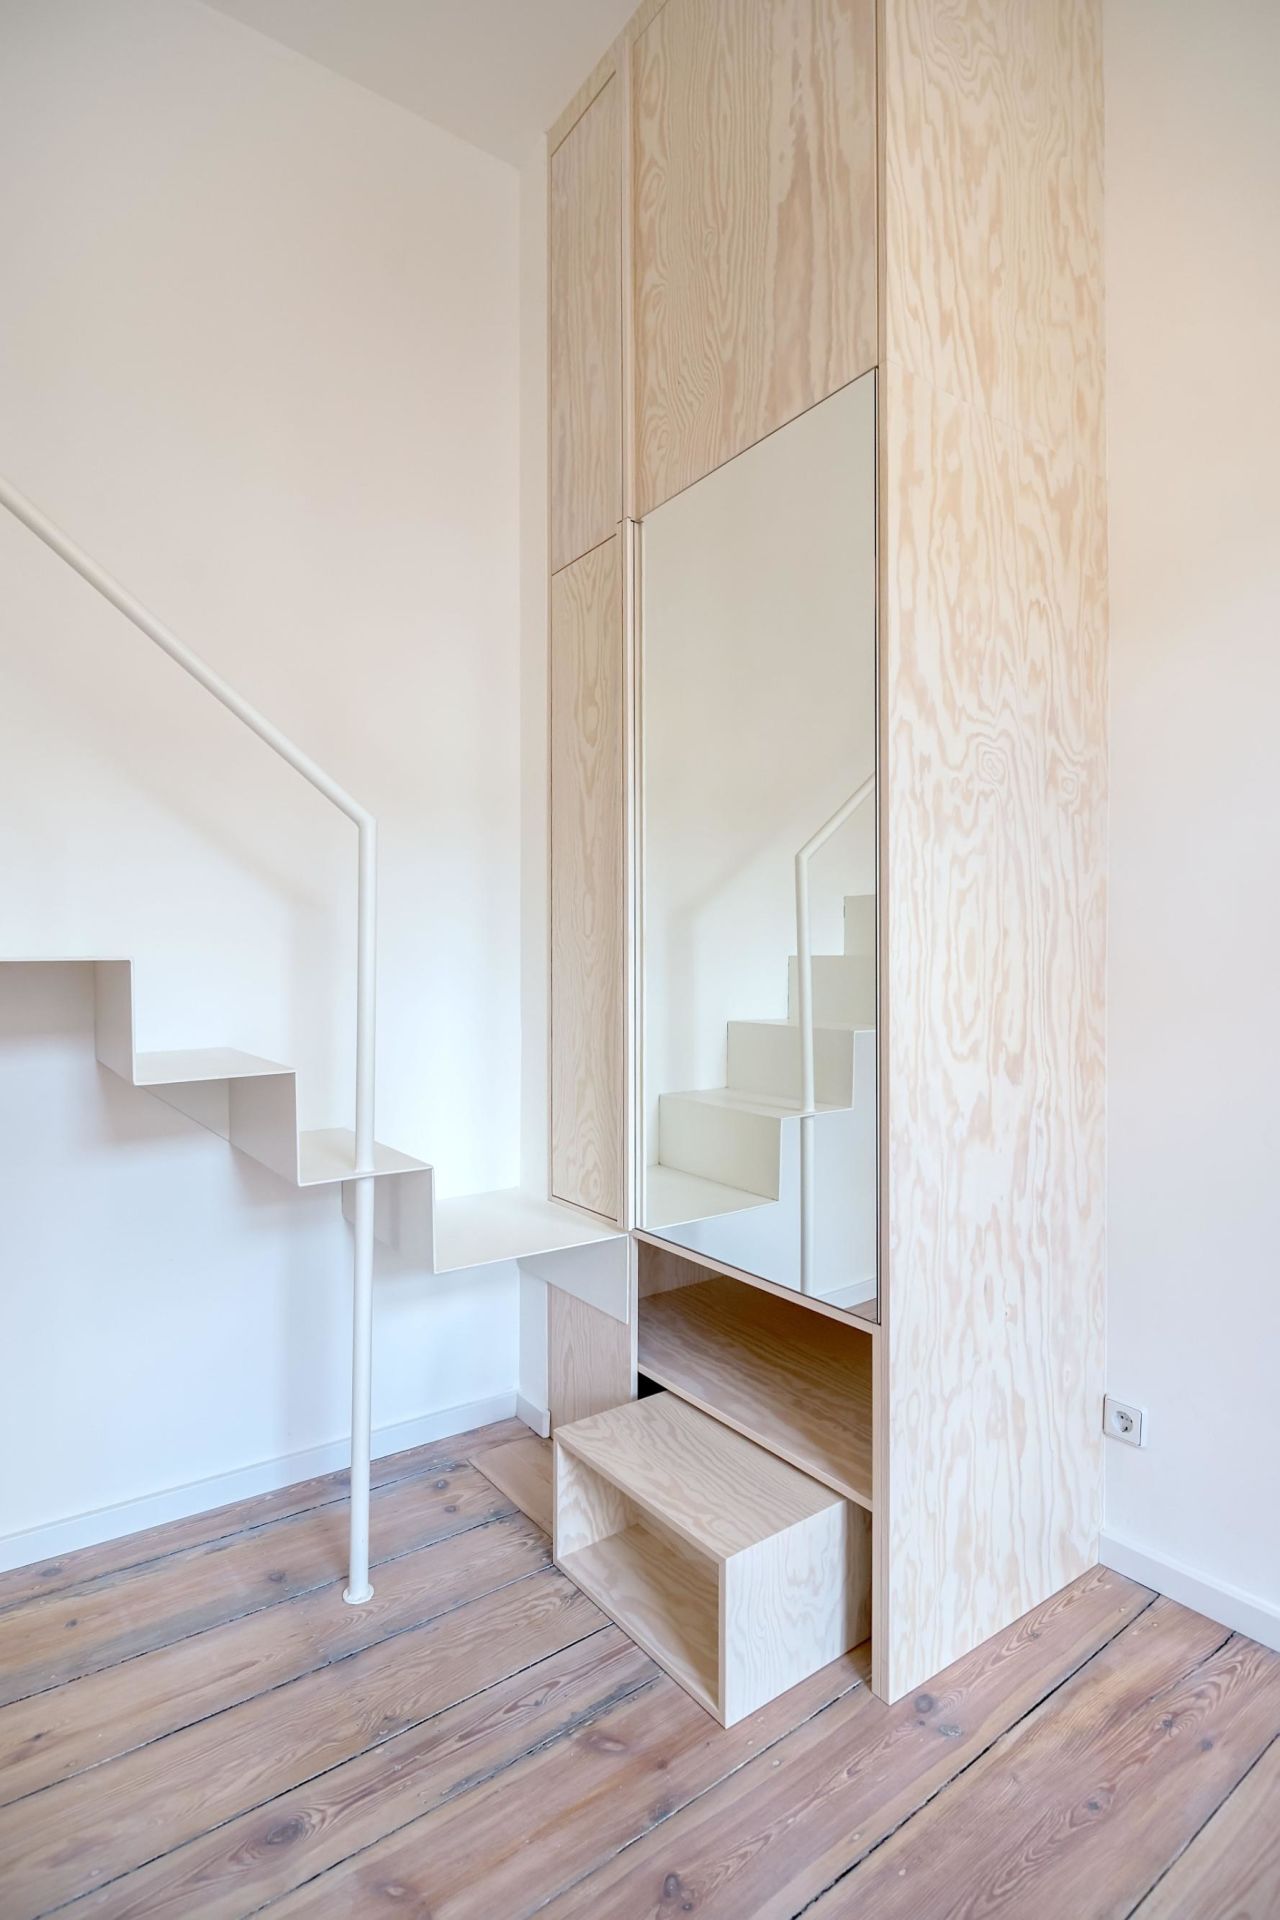 Mirrors can help create the illusion of space, as seen in Micro Apartment Moabit, a 226-square-foot studio apartment in Berlin designed by architects Paola Bagna and John Paul Coss.